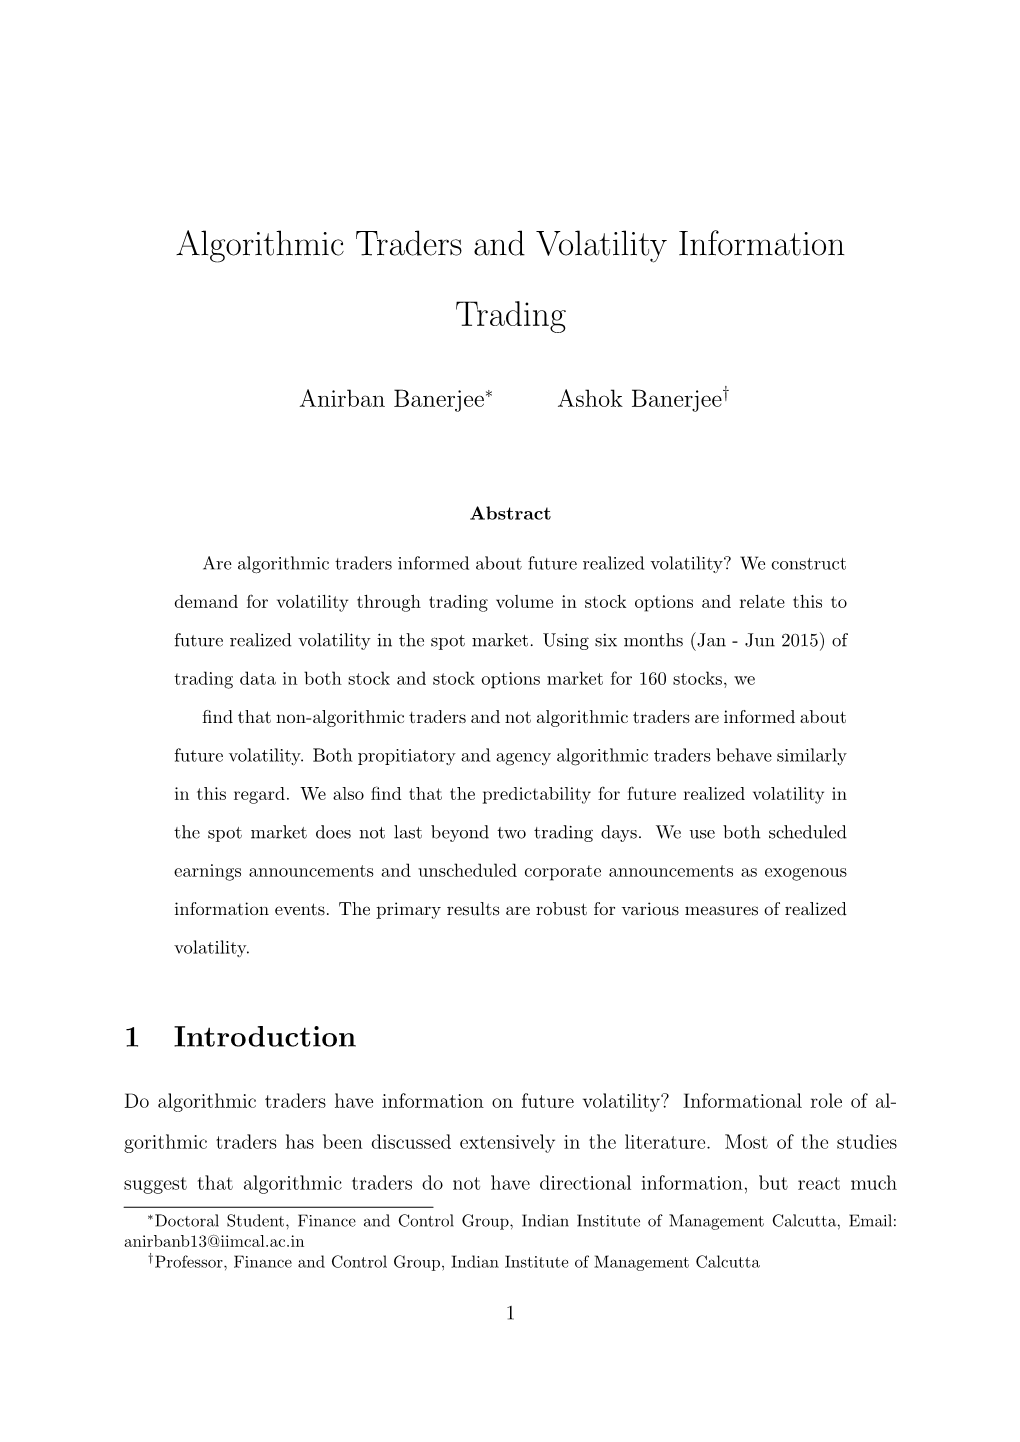 Algorithmic Traders and Volatility Information Trading